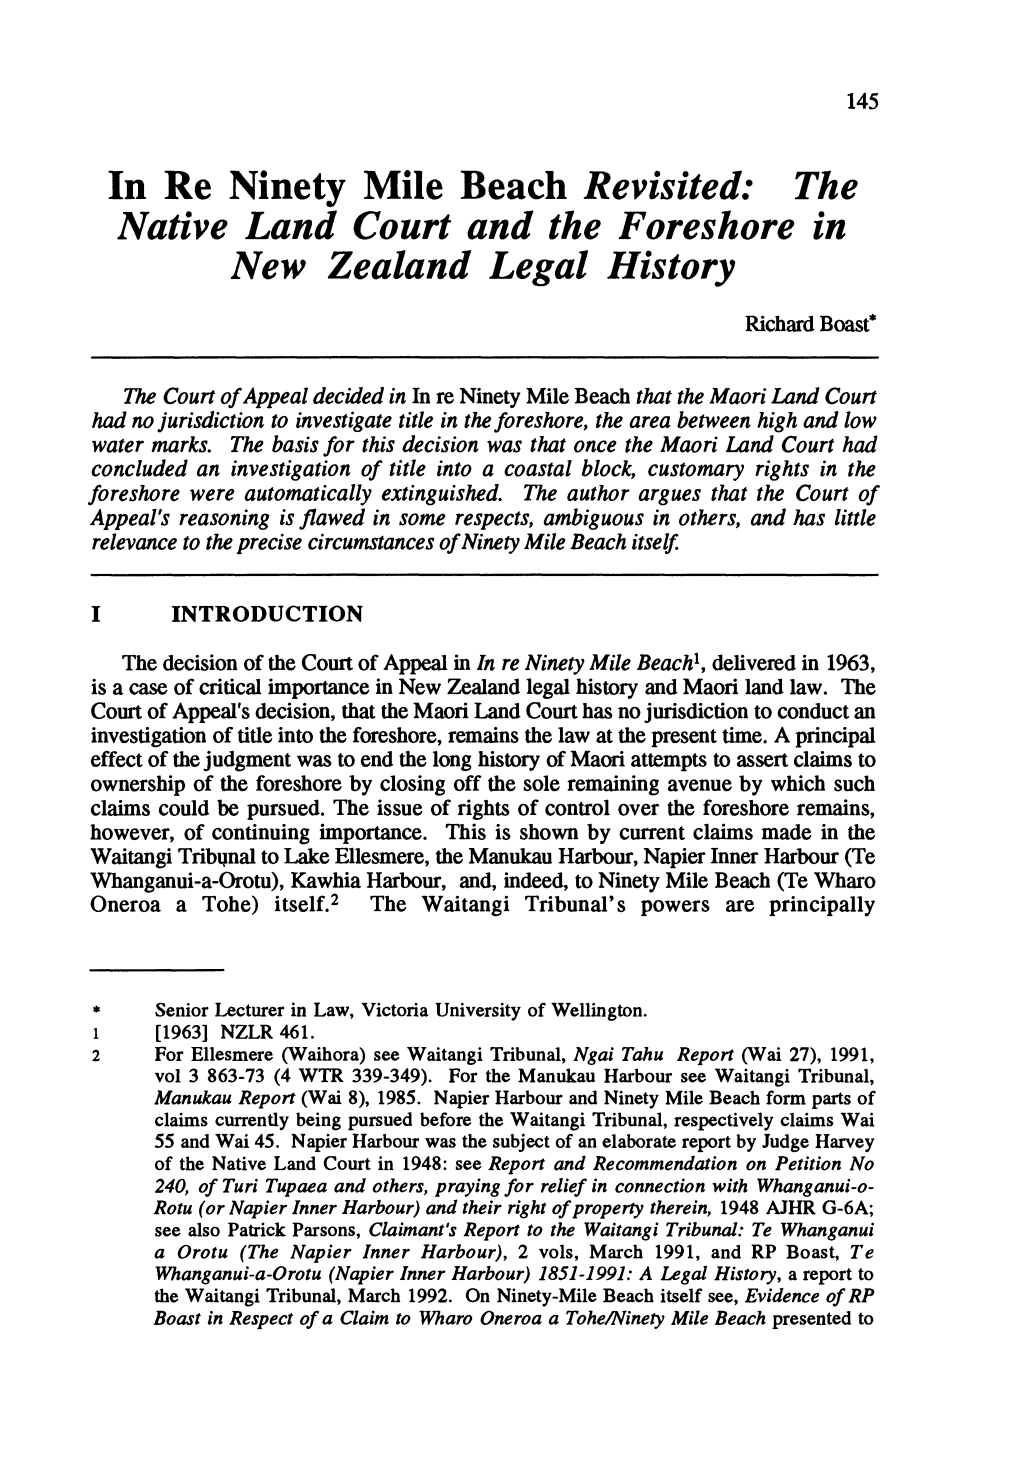 In Re Ninety Mile Beach Revisited: the Native Land Court and the Foreshore in New Zealand Legal History